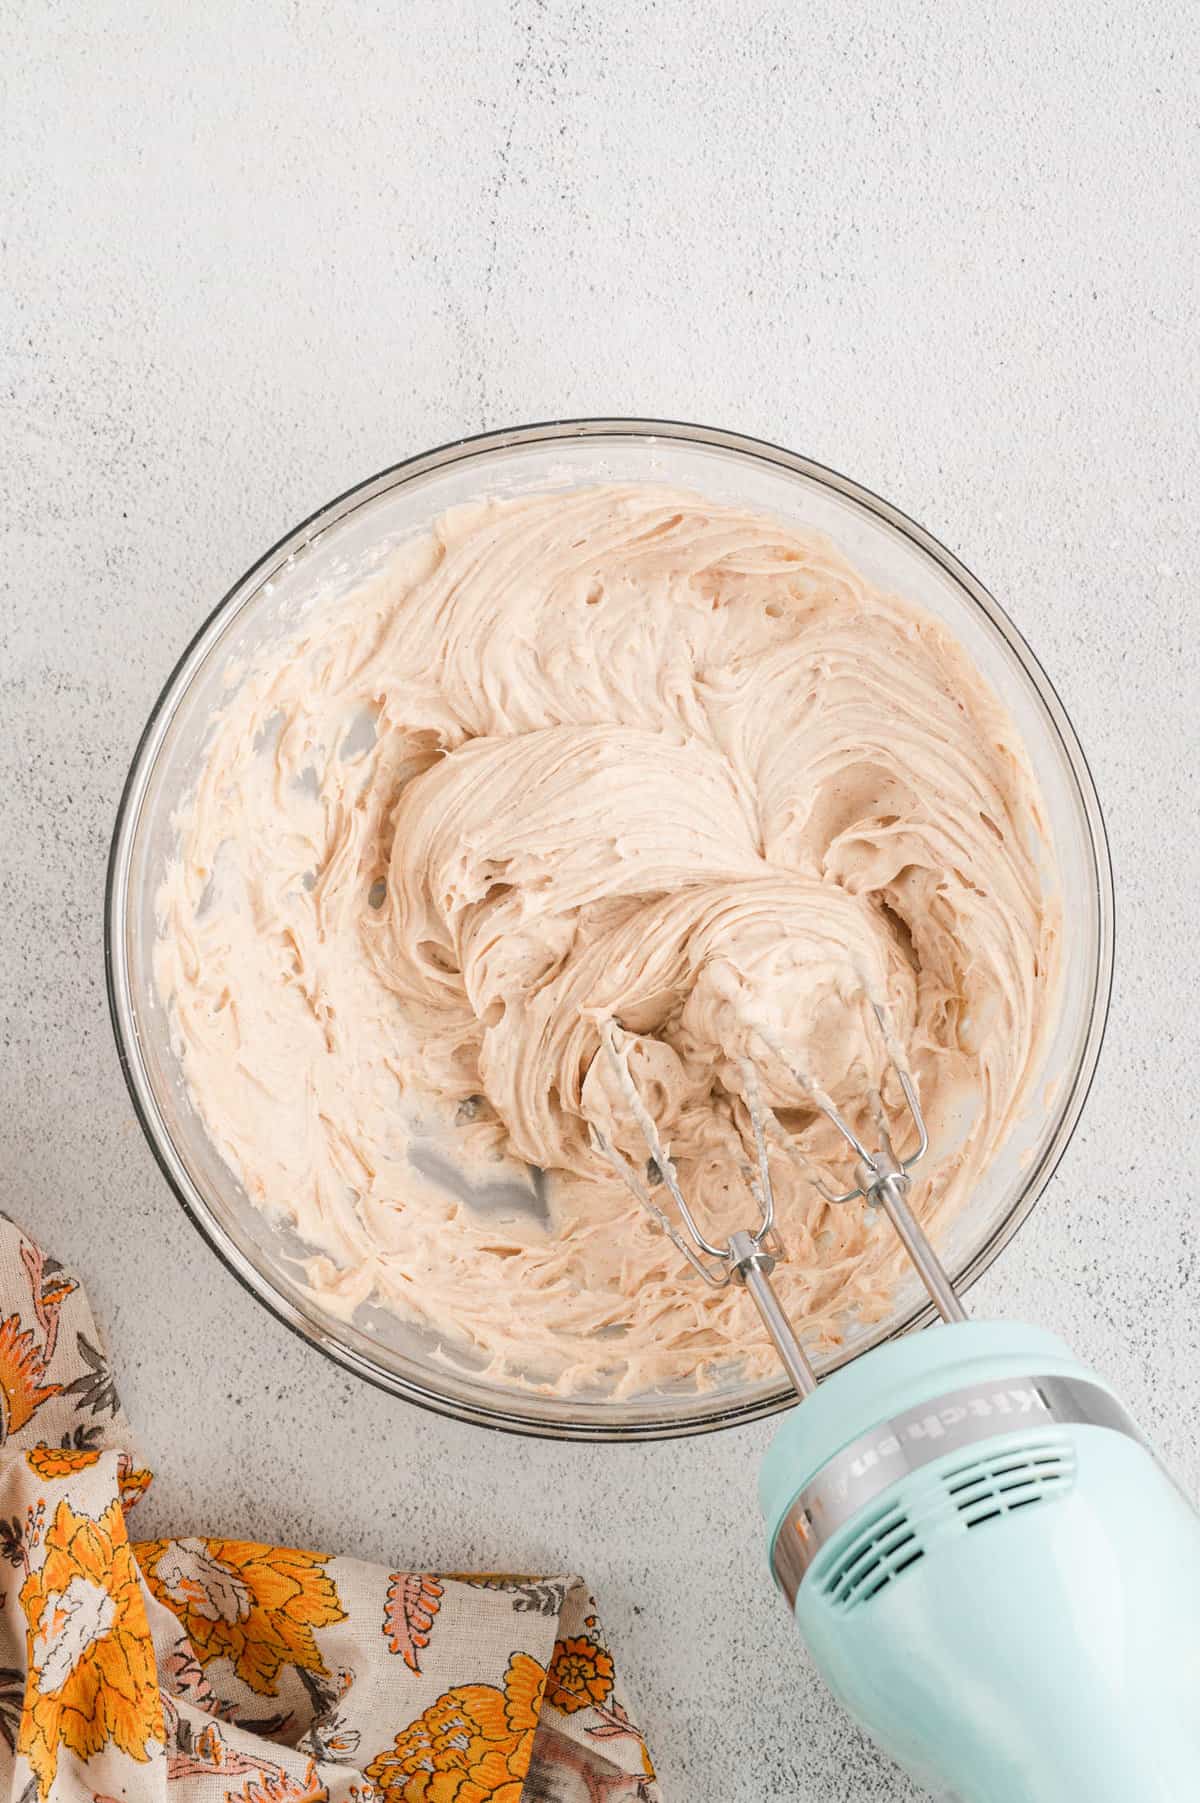 Perfectly blended cream cheese frosting in mixing bowl for Pumpkin Bars recipe